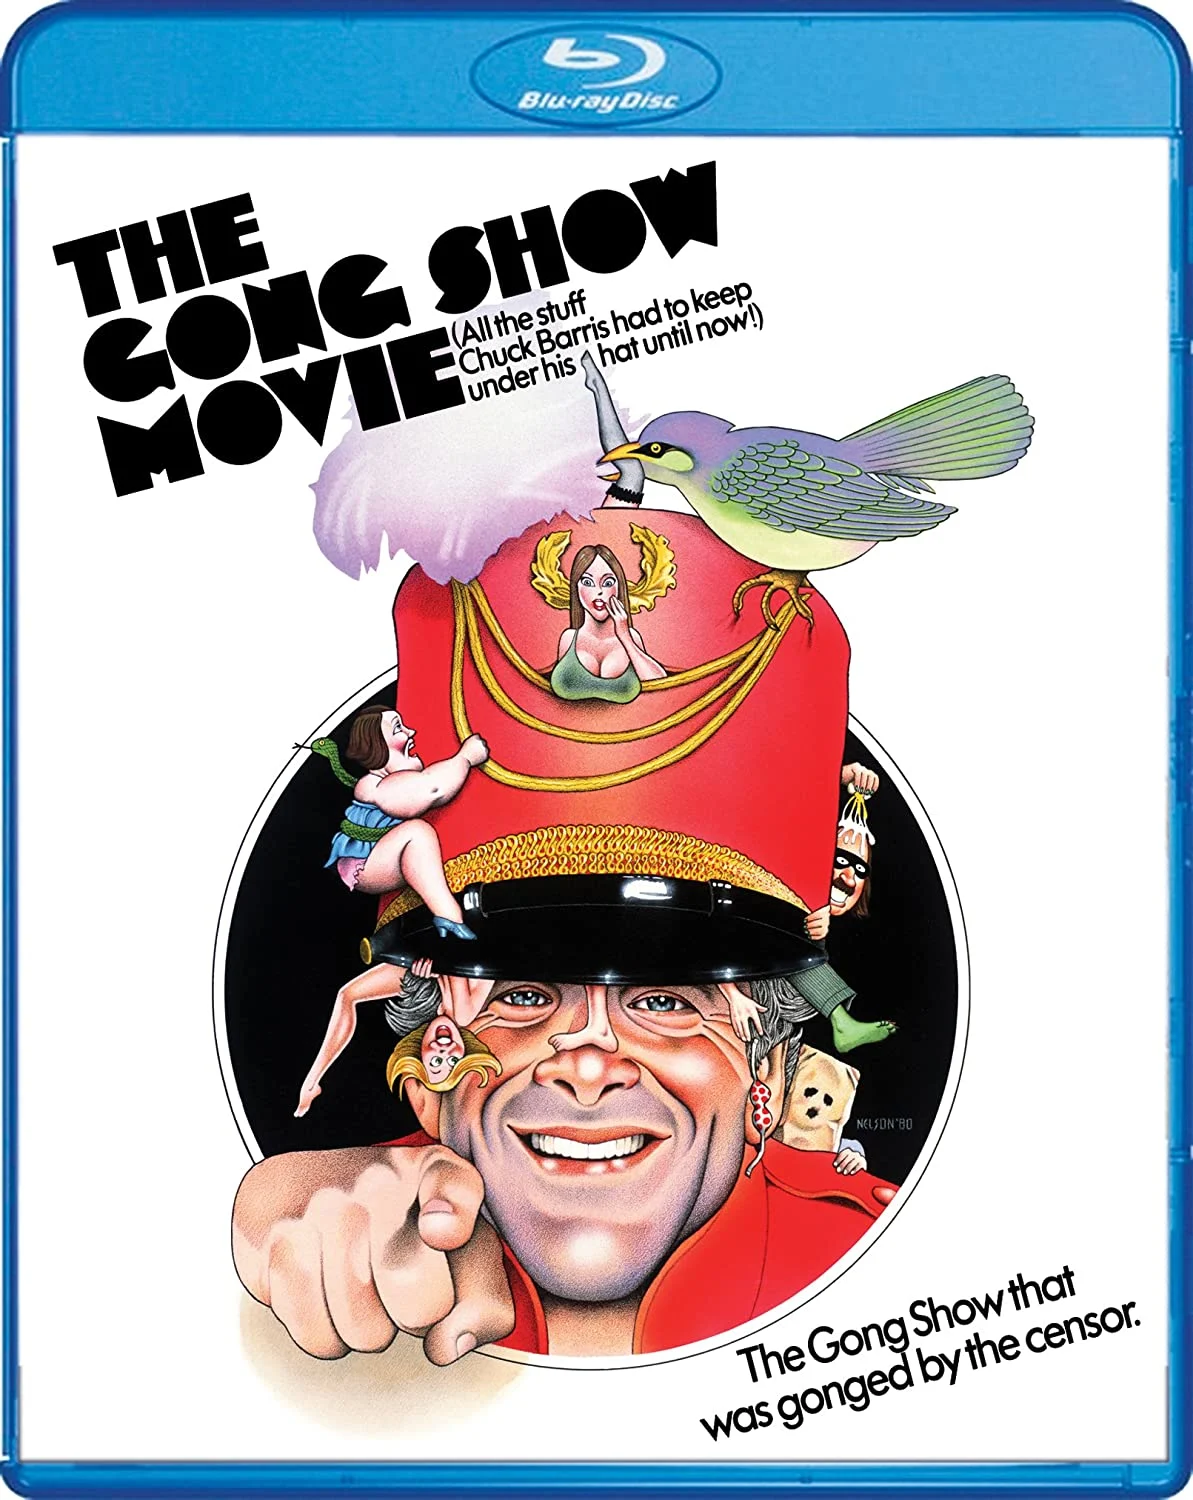 Gong Show Movie, The (Blu-ray) on MovieShack